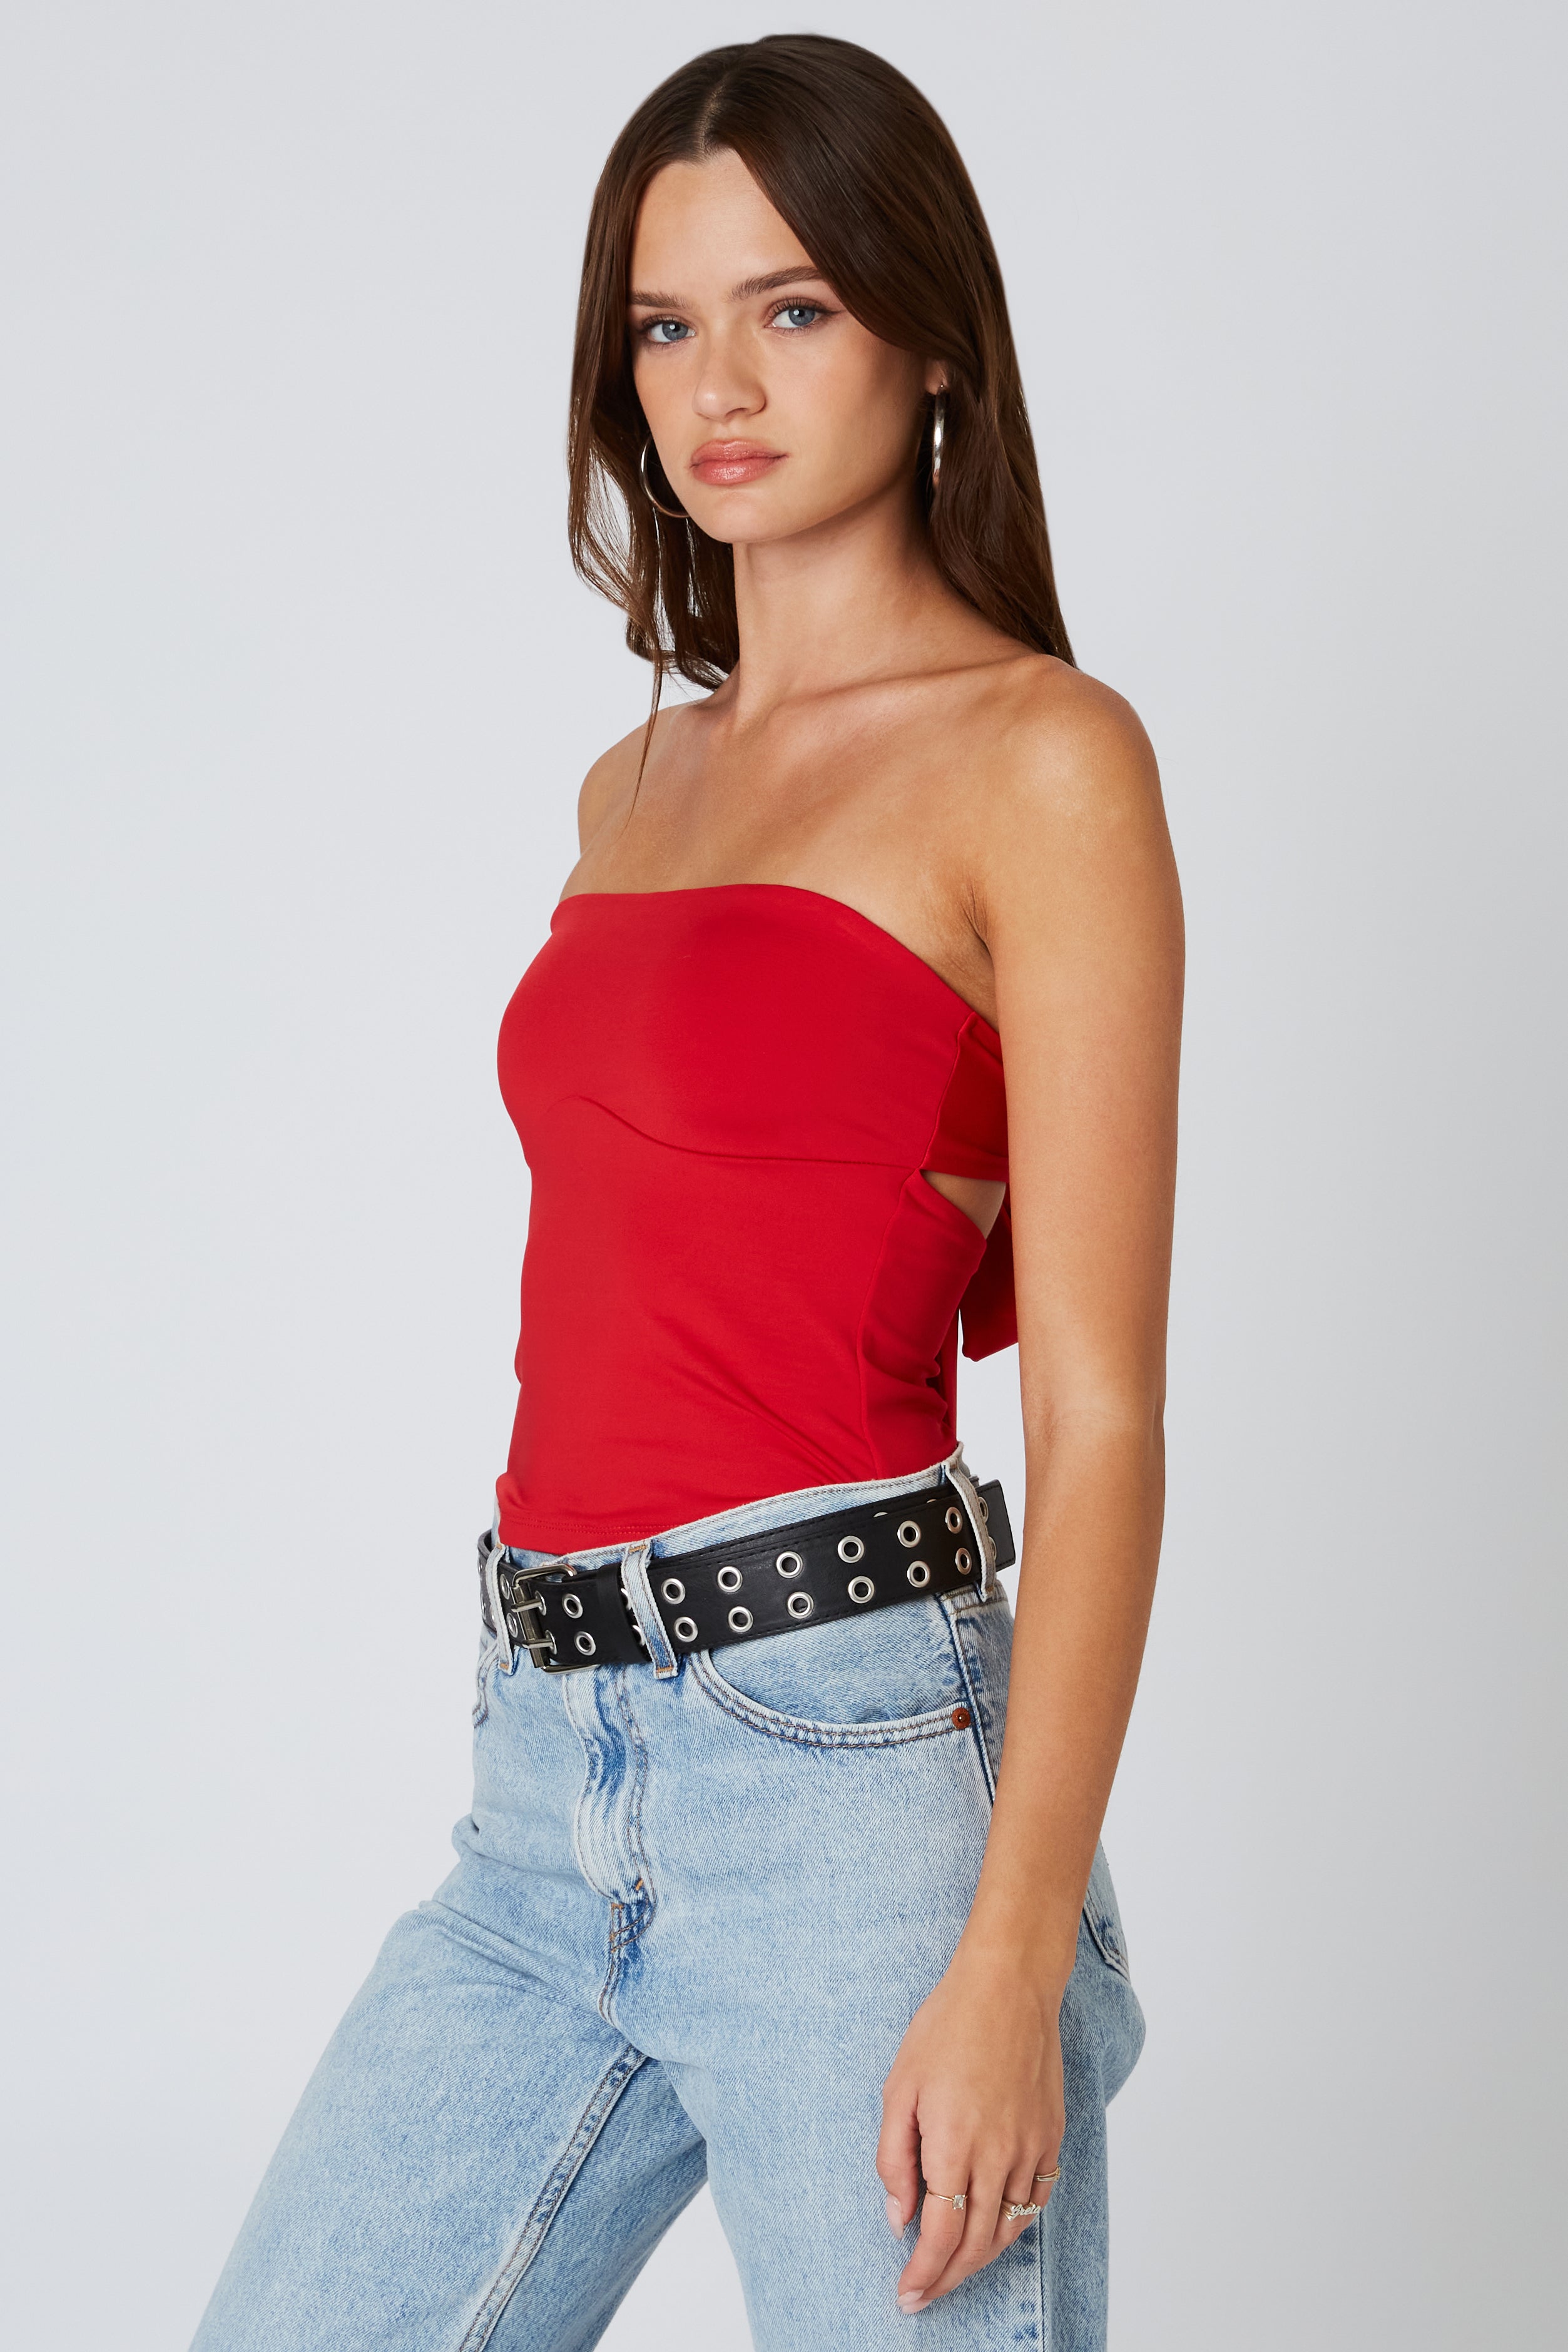 Slinky Tube Top in Red Side View